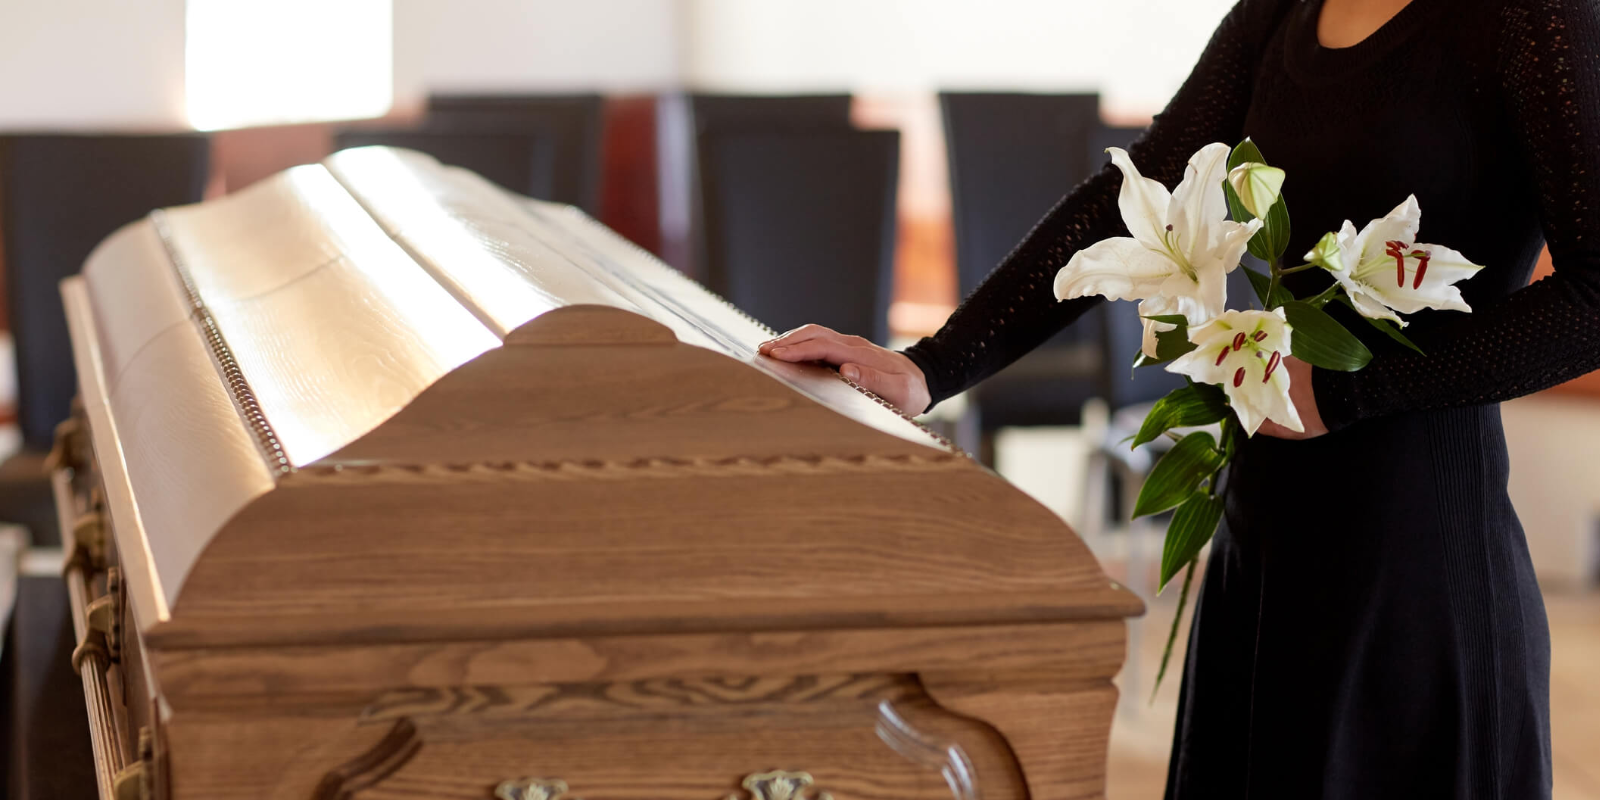 All Aspects of Funeral Care